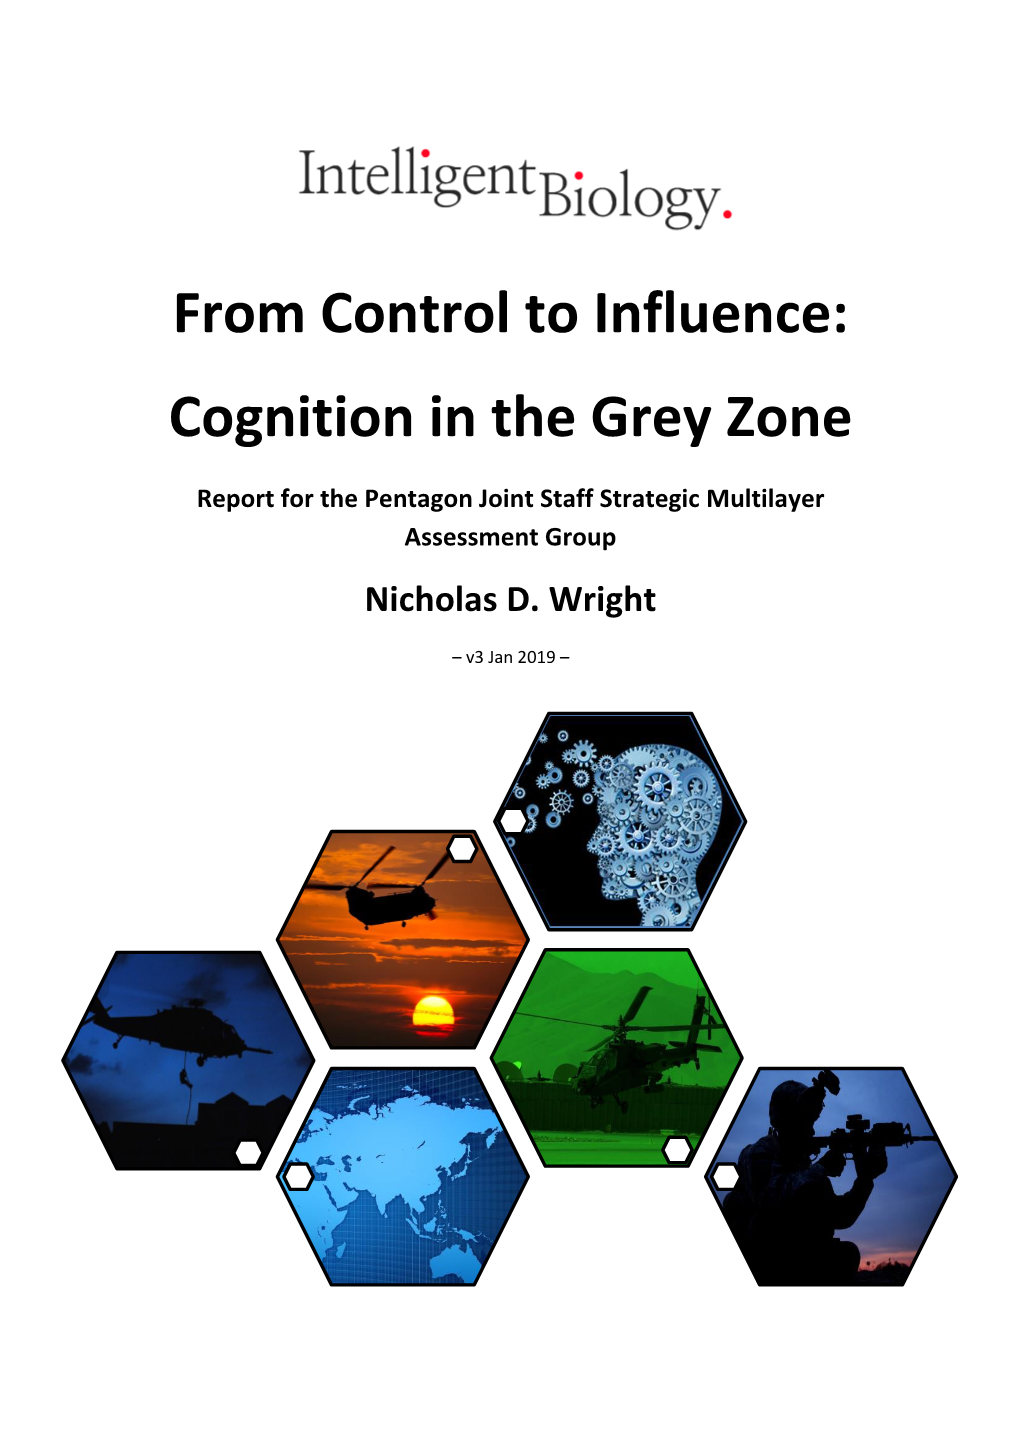 From Control to Influence: Cognition in the Grey Zone